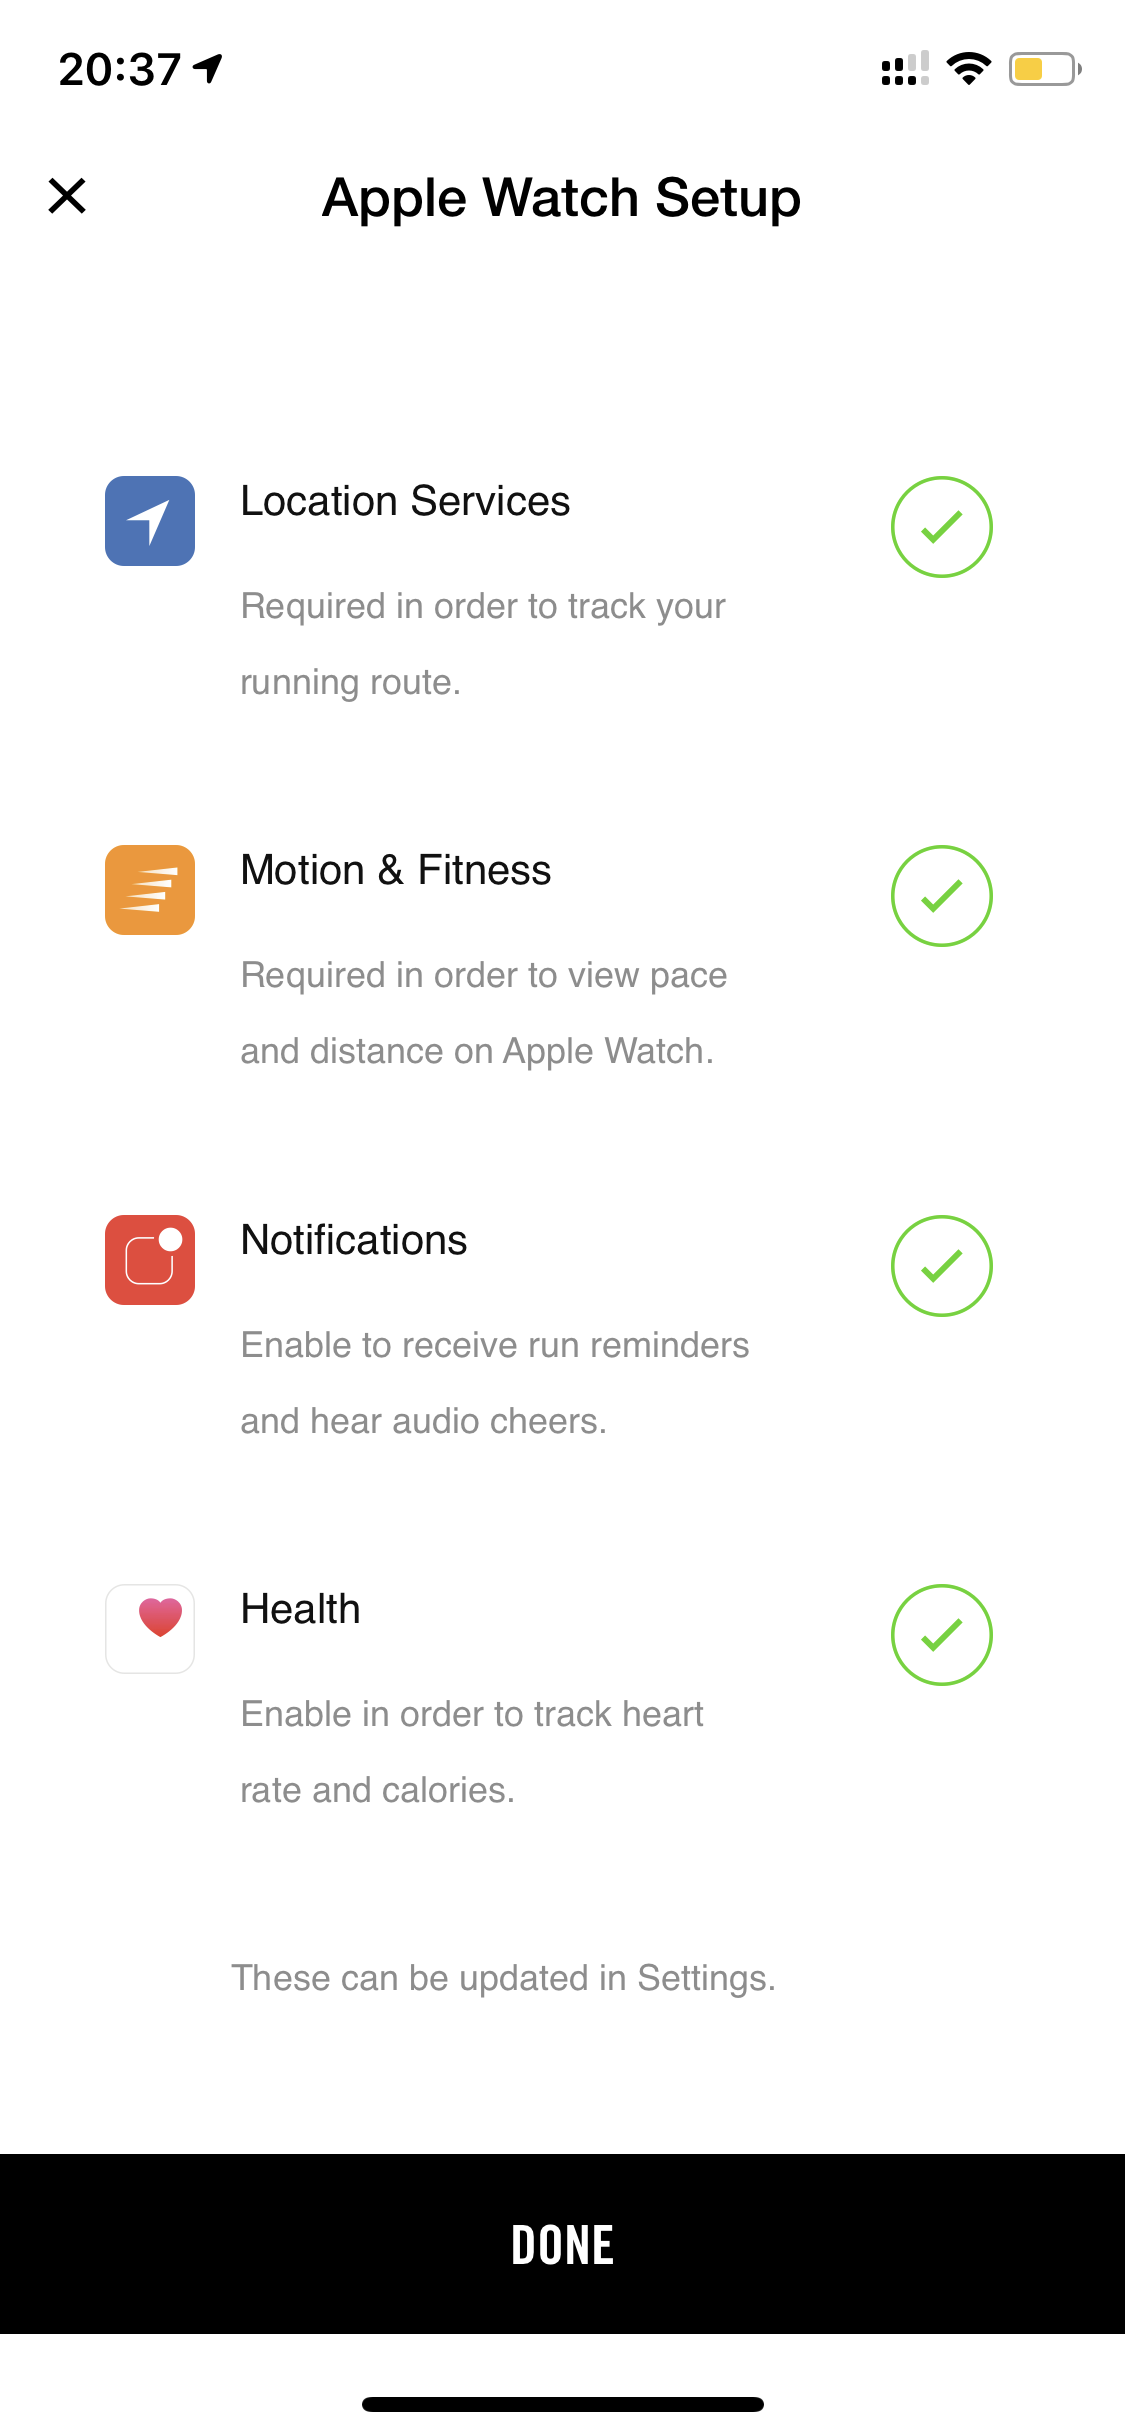 nike run club apple watch motion and fitness access required